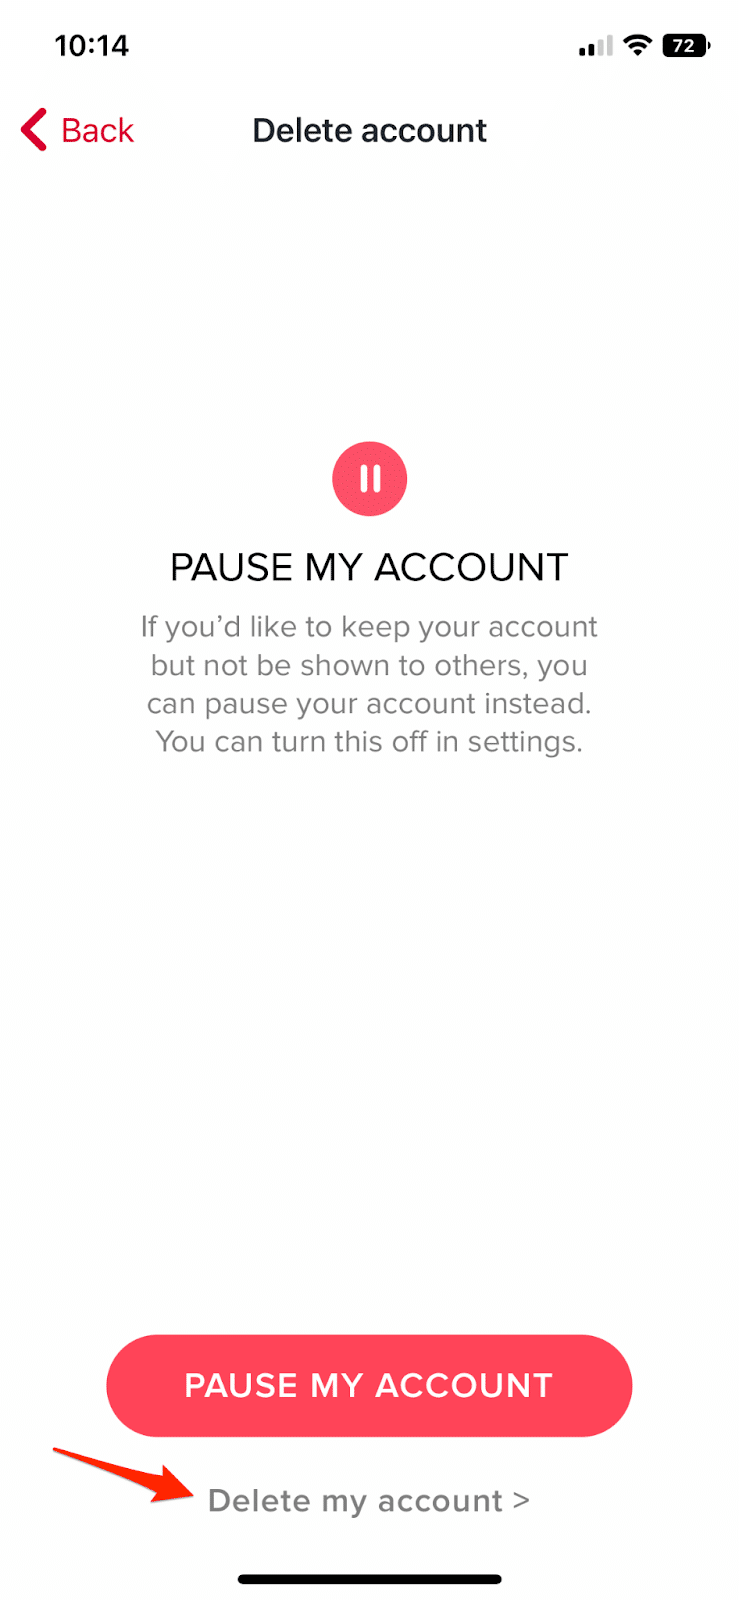 You can decide whether you want to pause your Tinder account or delete it